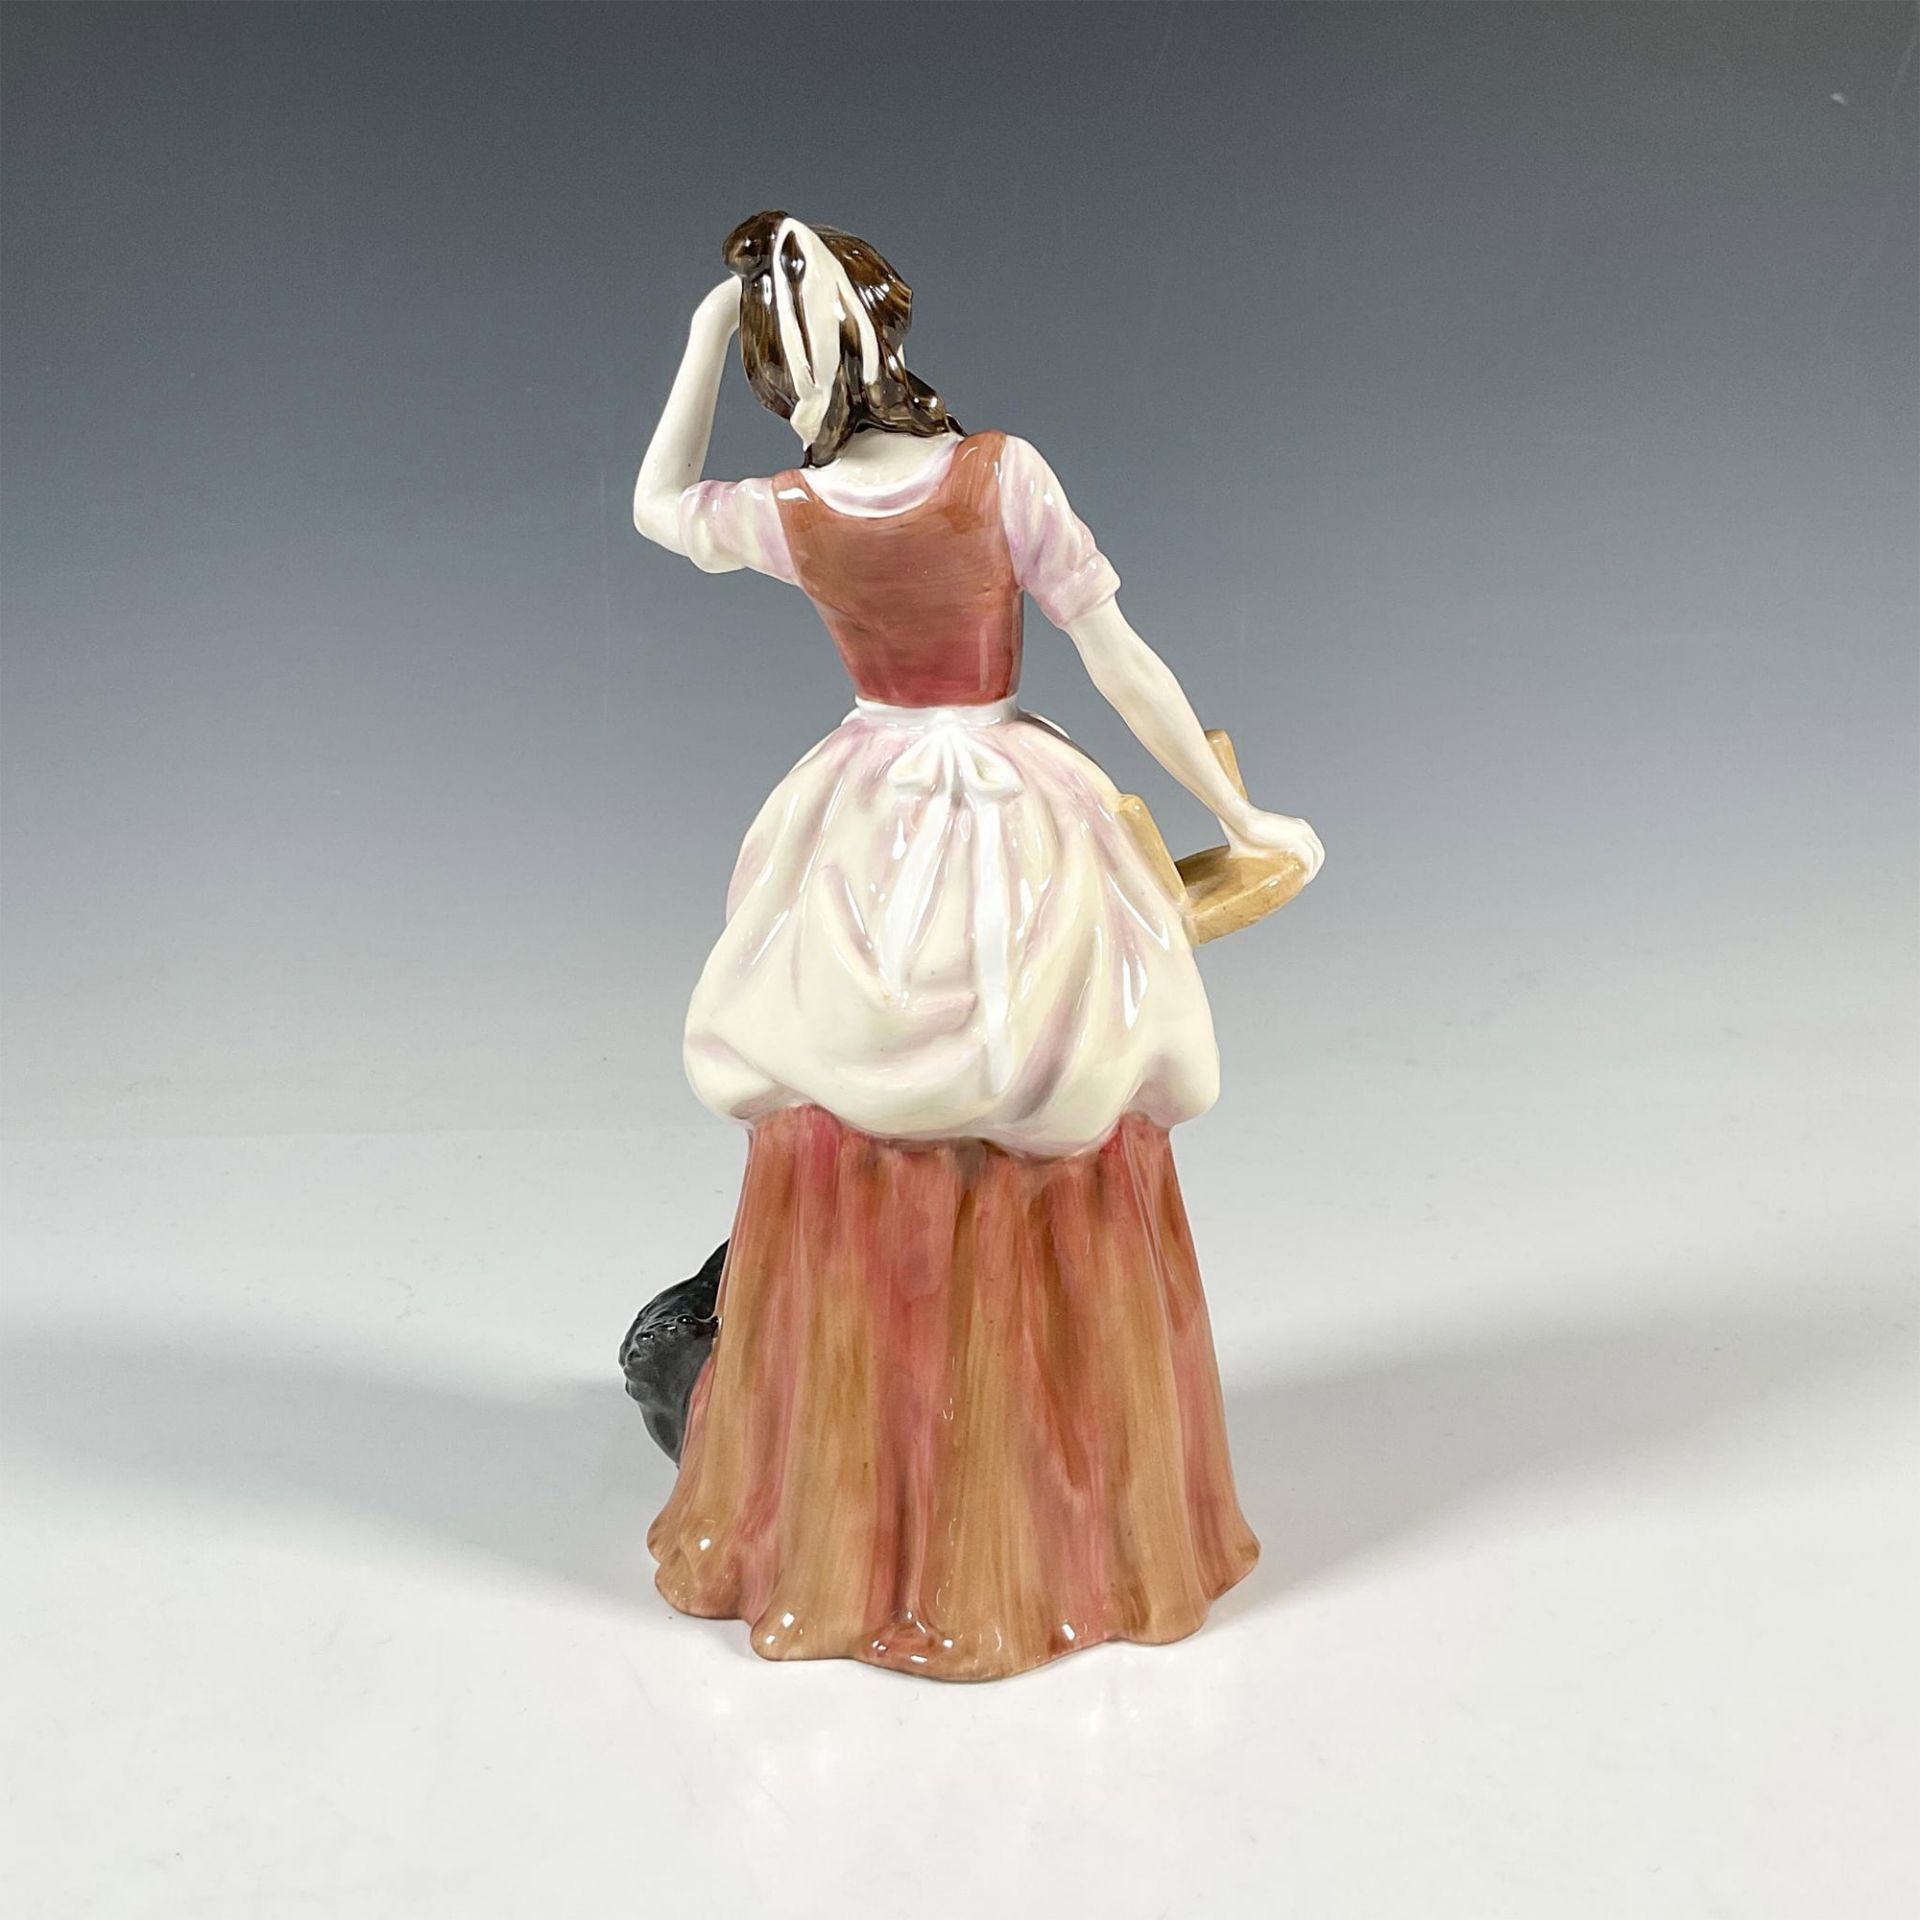 Tess of the D'Urbervilles HN3846 - Royal Doulton Figurine - Image 3 of 5